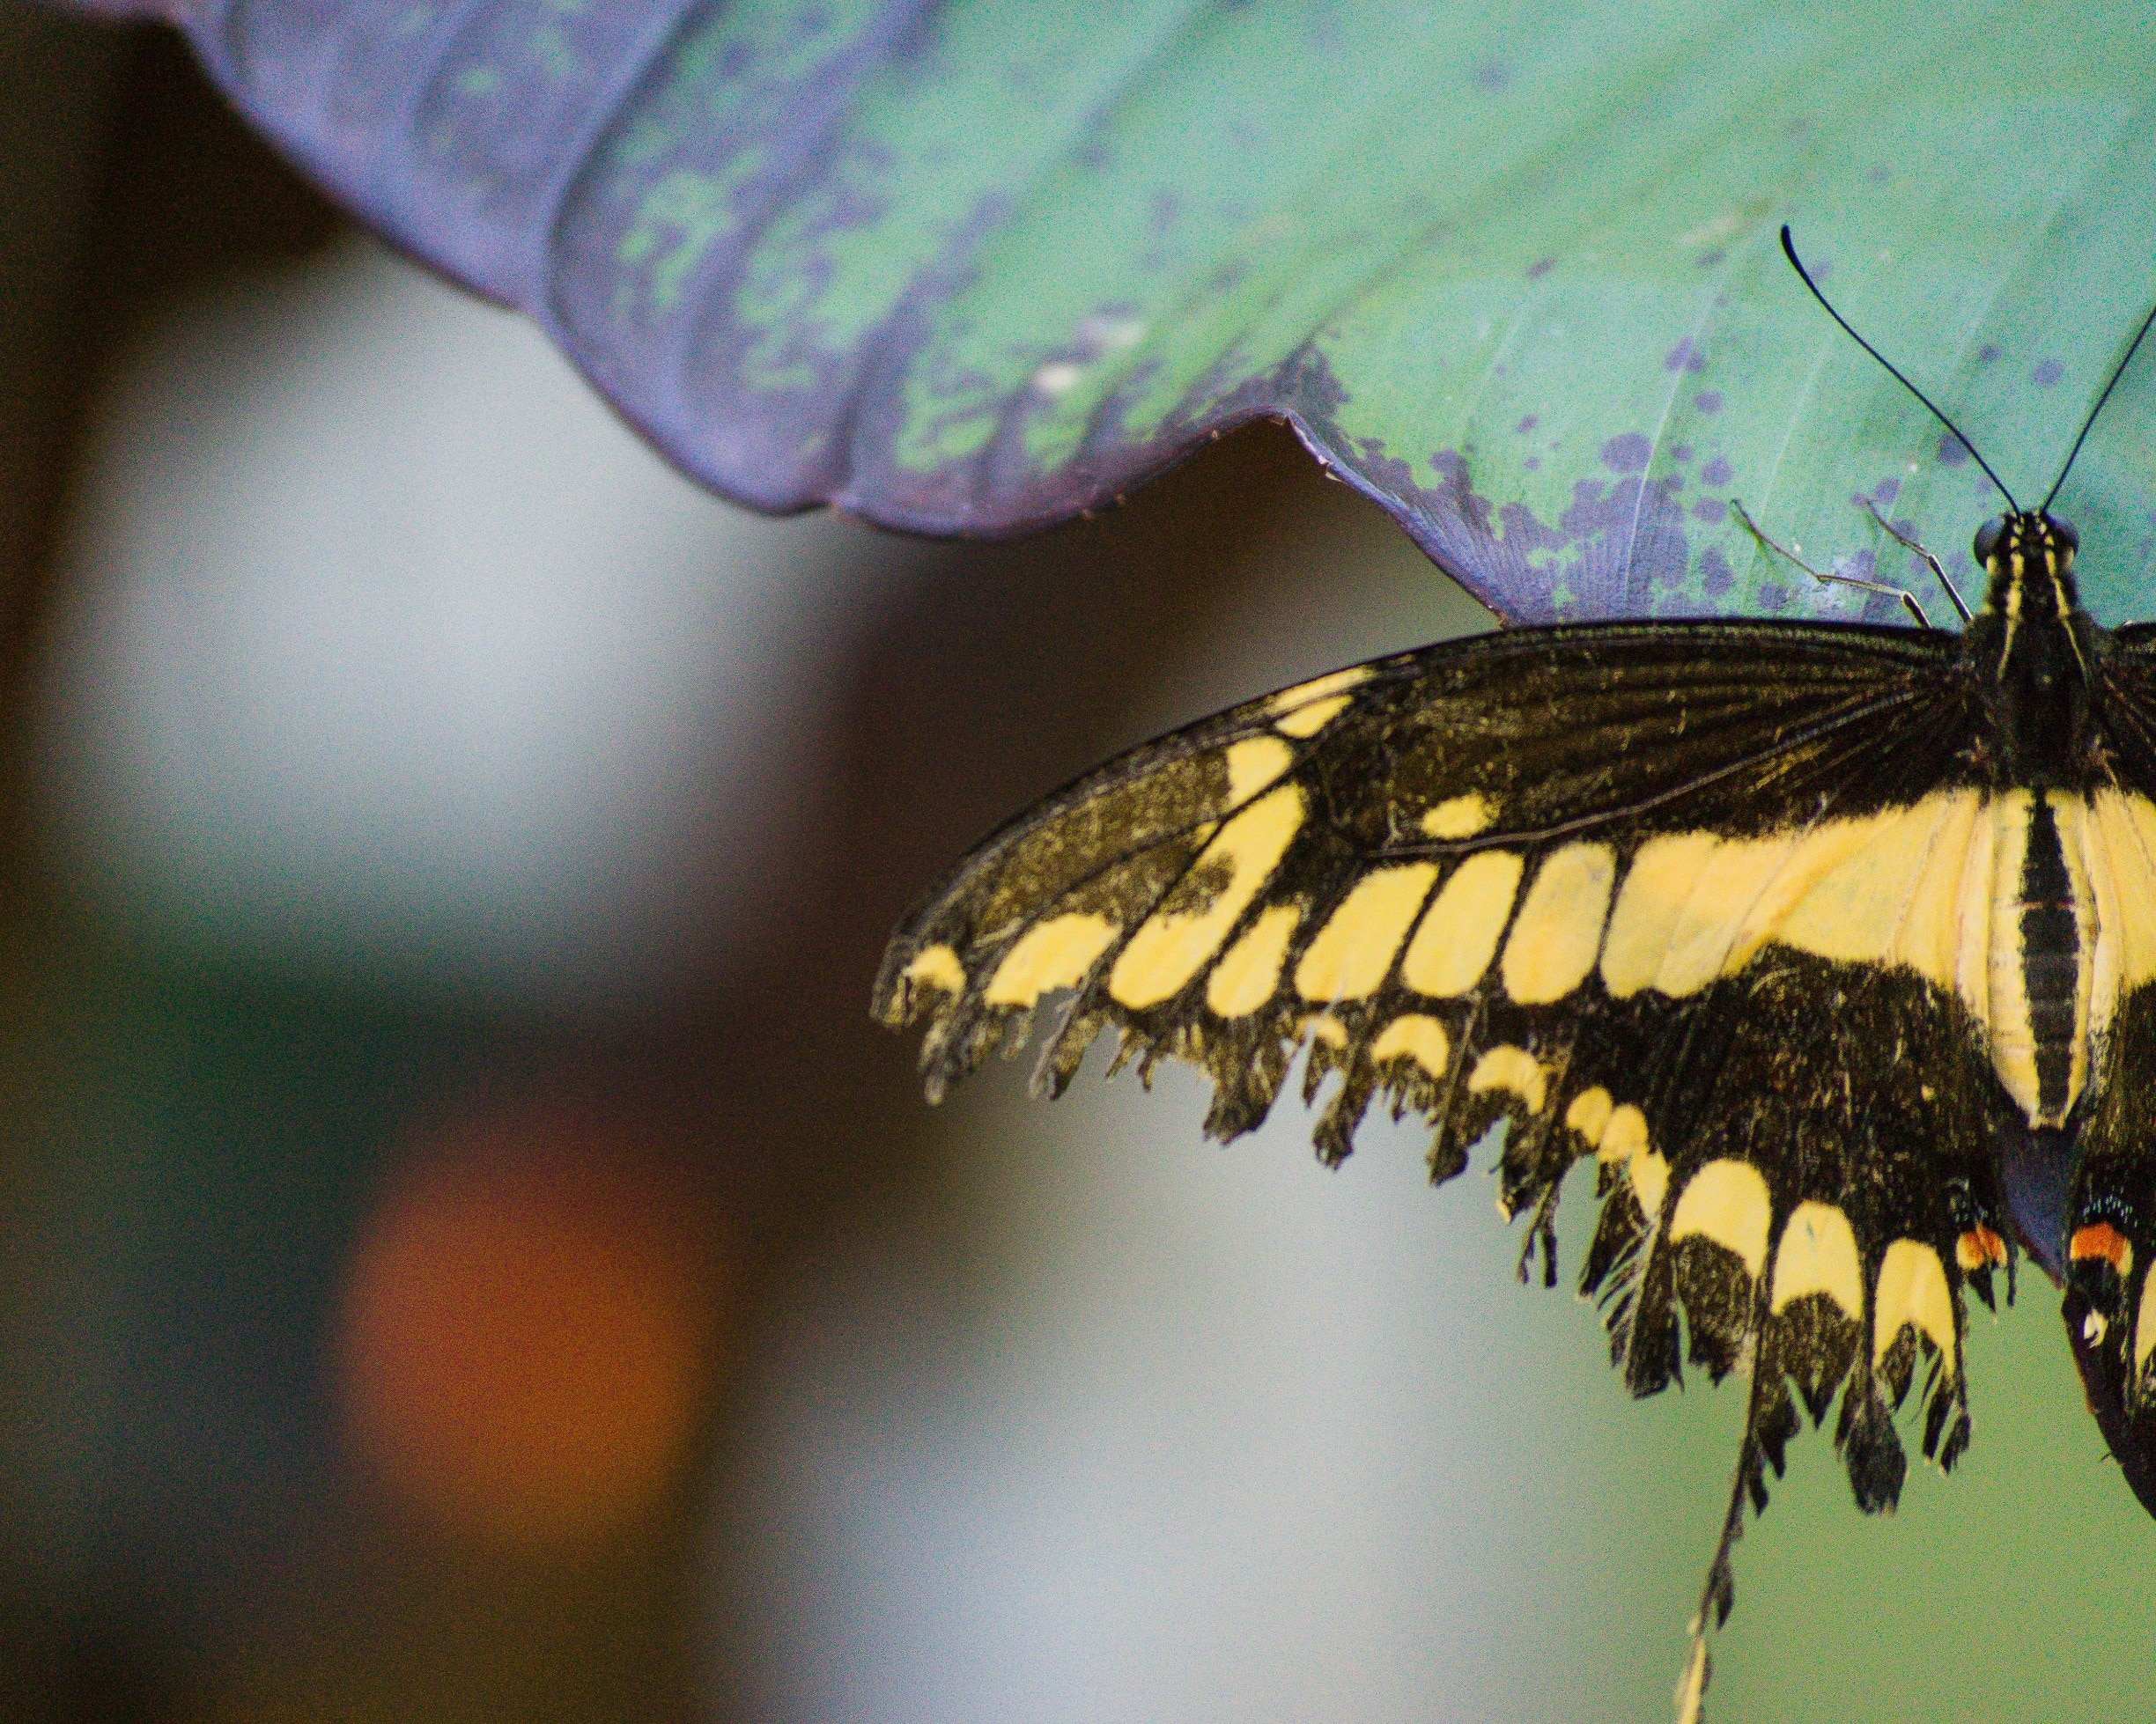 There are two butterfly conservatories on Mackinac Island, the original and Wings of Mackinac. Each holds hundreds of different butterflies, and both are worth going to.

#MackinacIsland
#Butterflies
